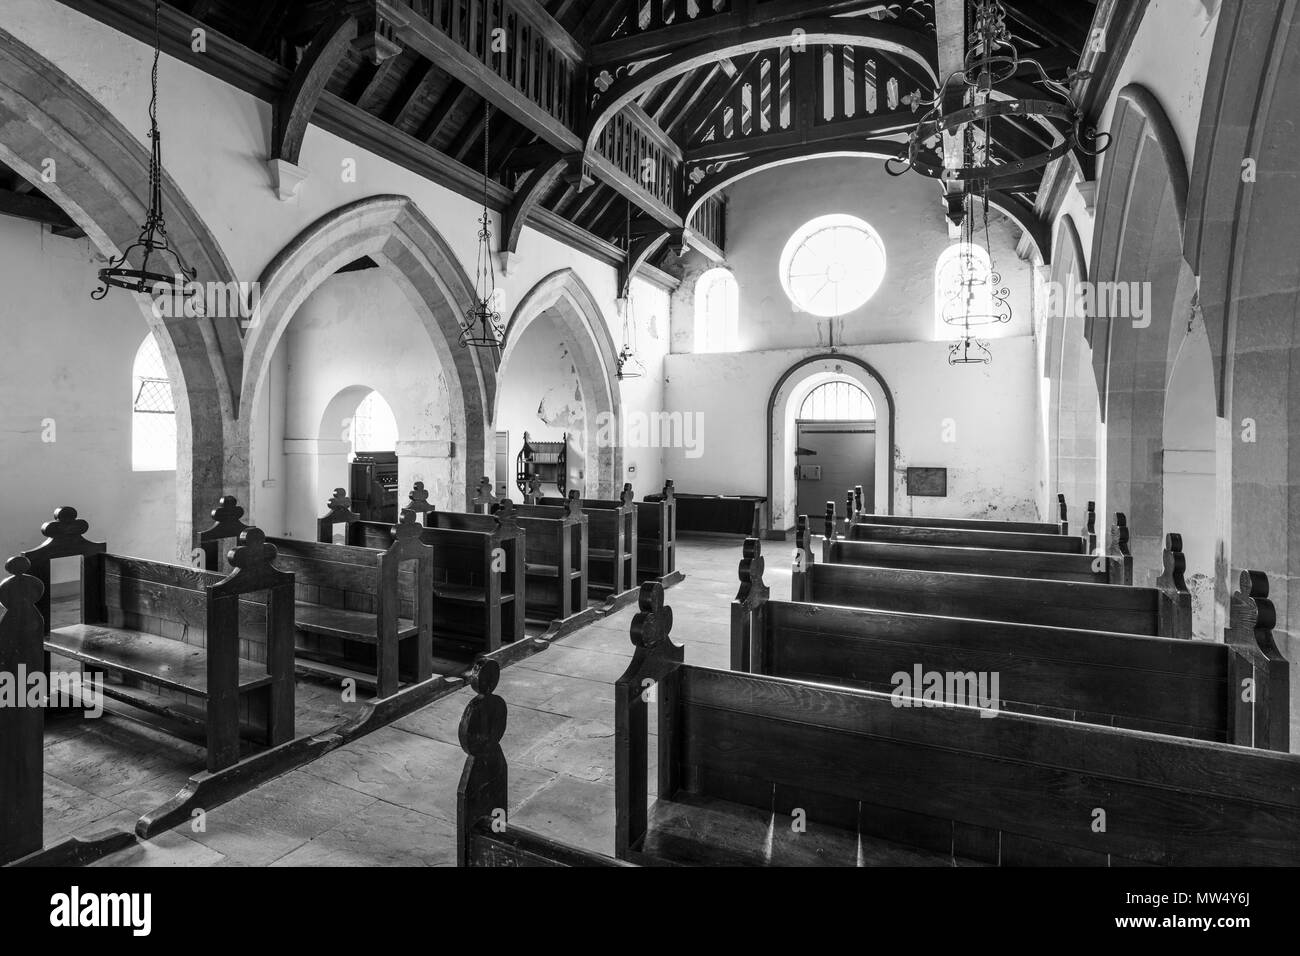 Interior b & w of historic St Martin's Church with wooden pews, aisle & hammerbeam roof in nave -  Allerton Mauleverer, North Yorkshire, England, UK. Stock Photo